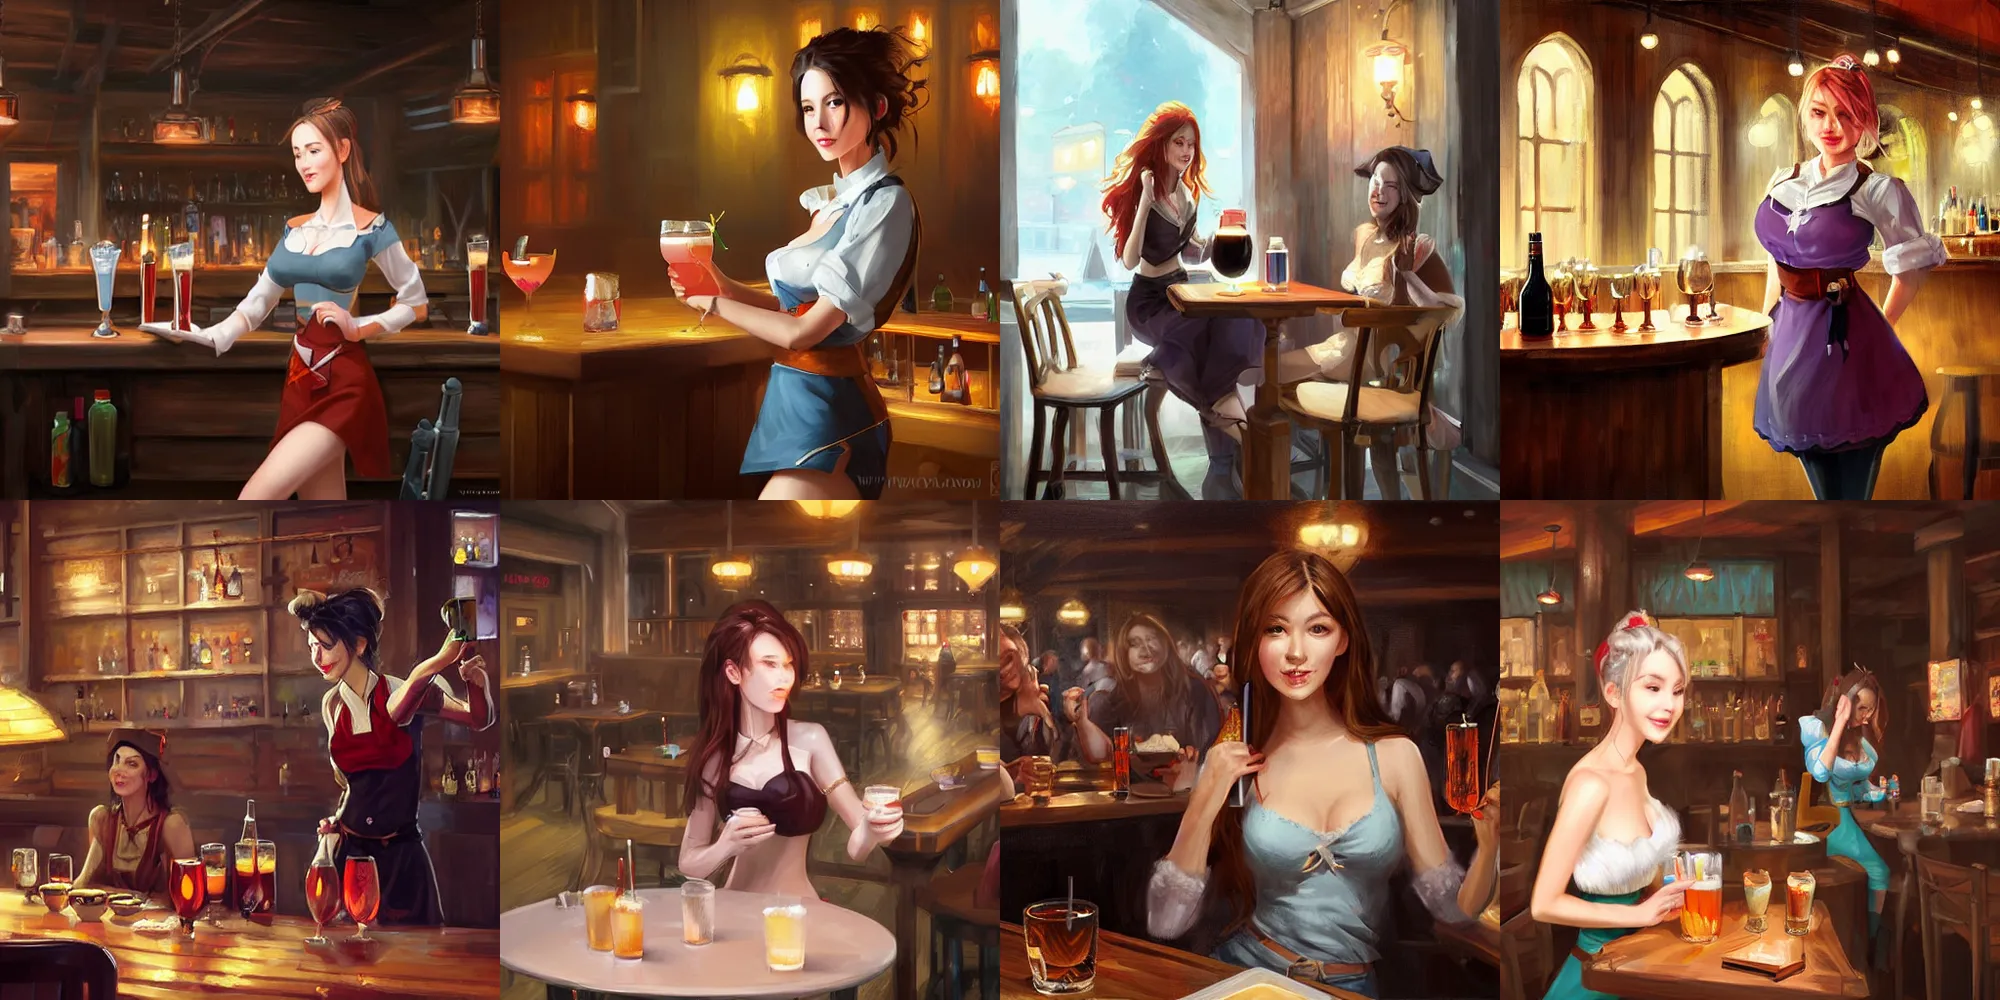 Prompt: A waitress in a fantasy tavern serves drinks to customers, digital painting by WLOP.